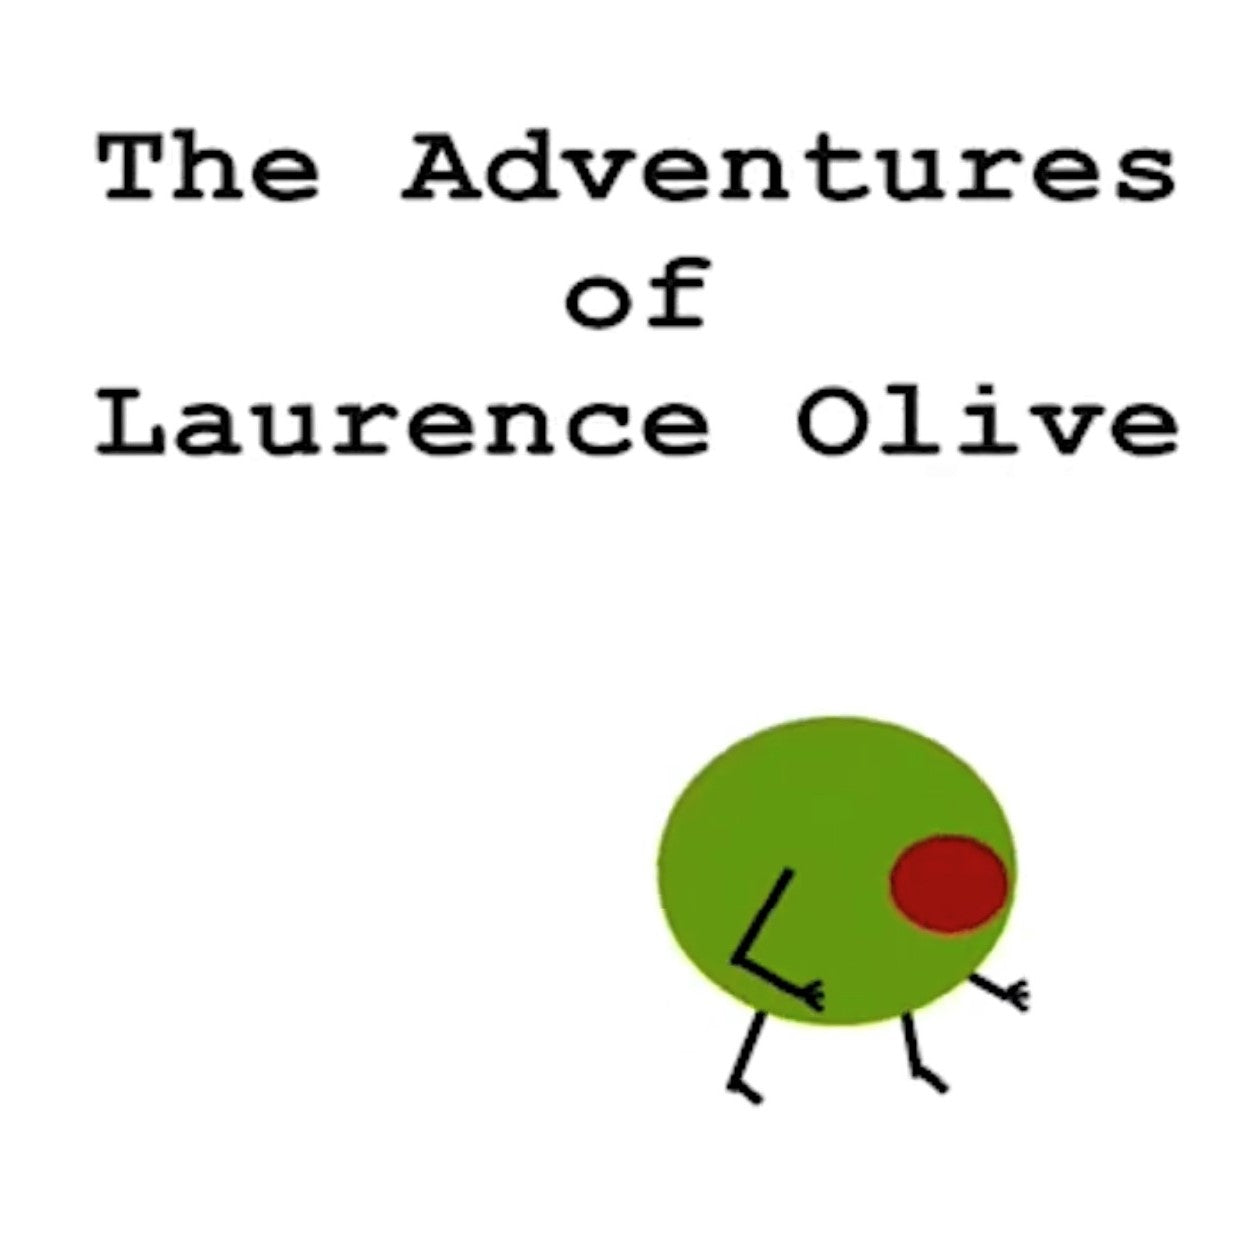 The Adventures of Laurence Olive - title card